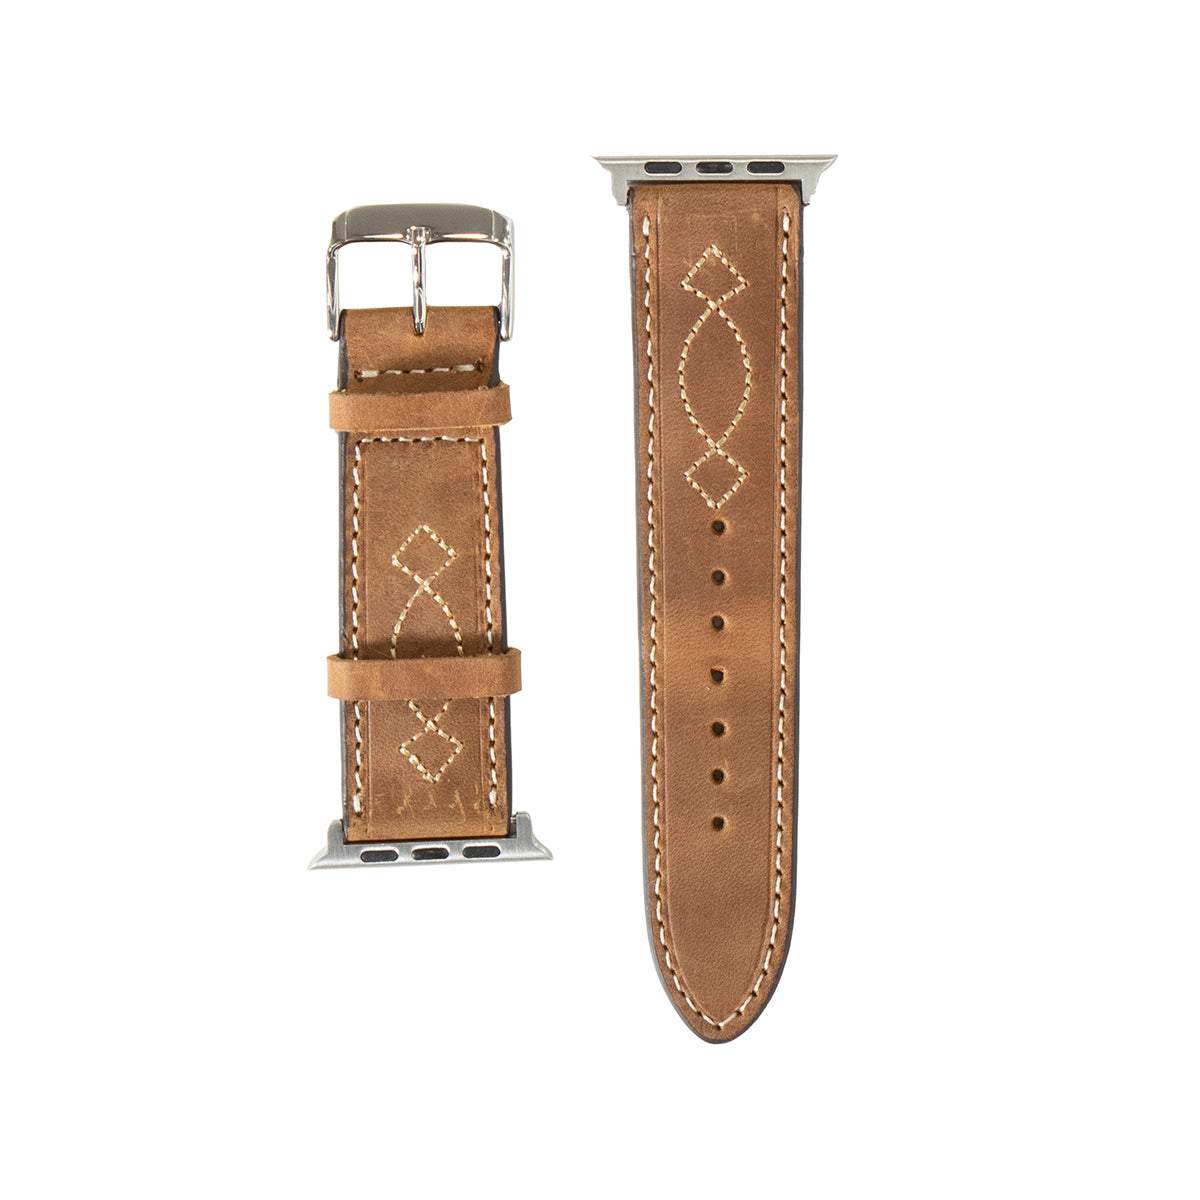 Nocona Women's Embroidered iWatch Band - Tan/Brown